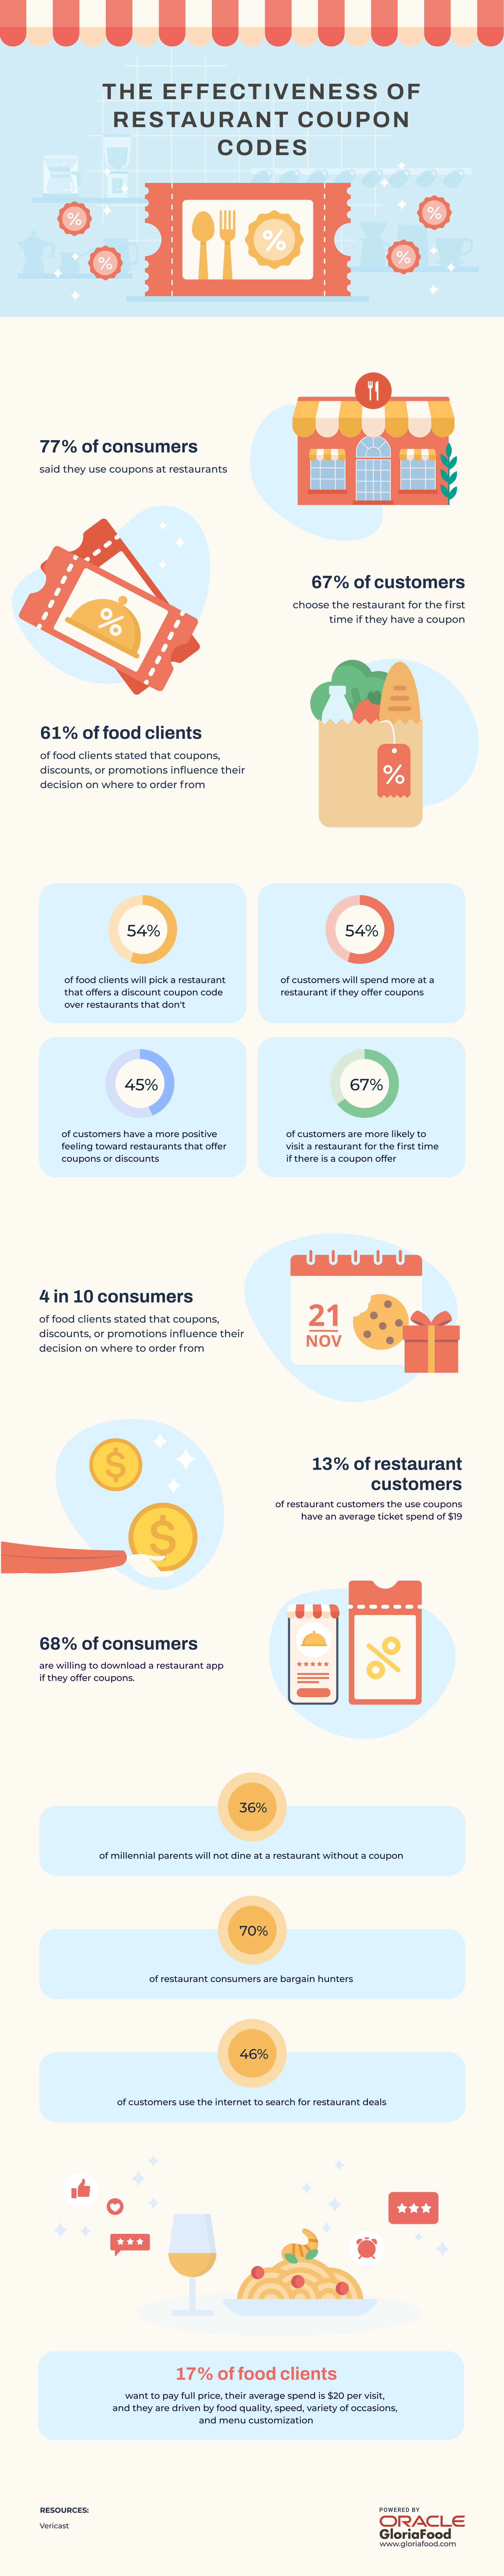 restaurant coupon code infographic